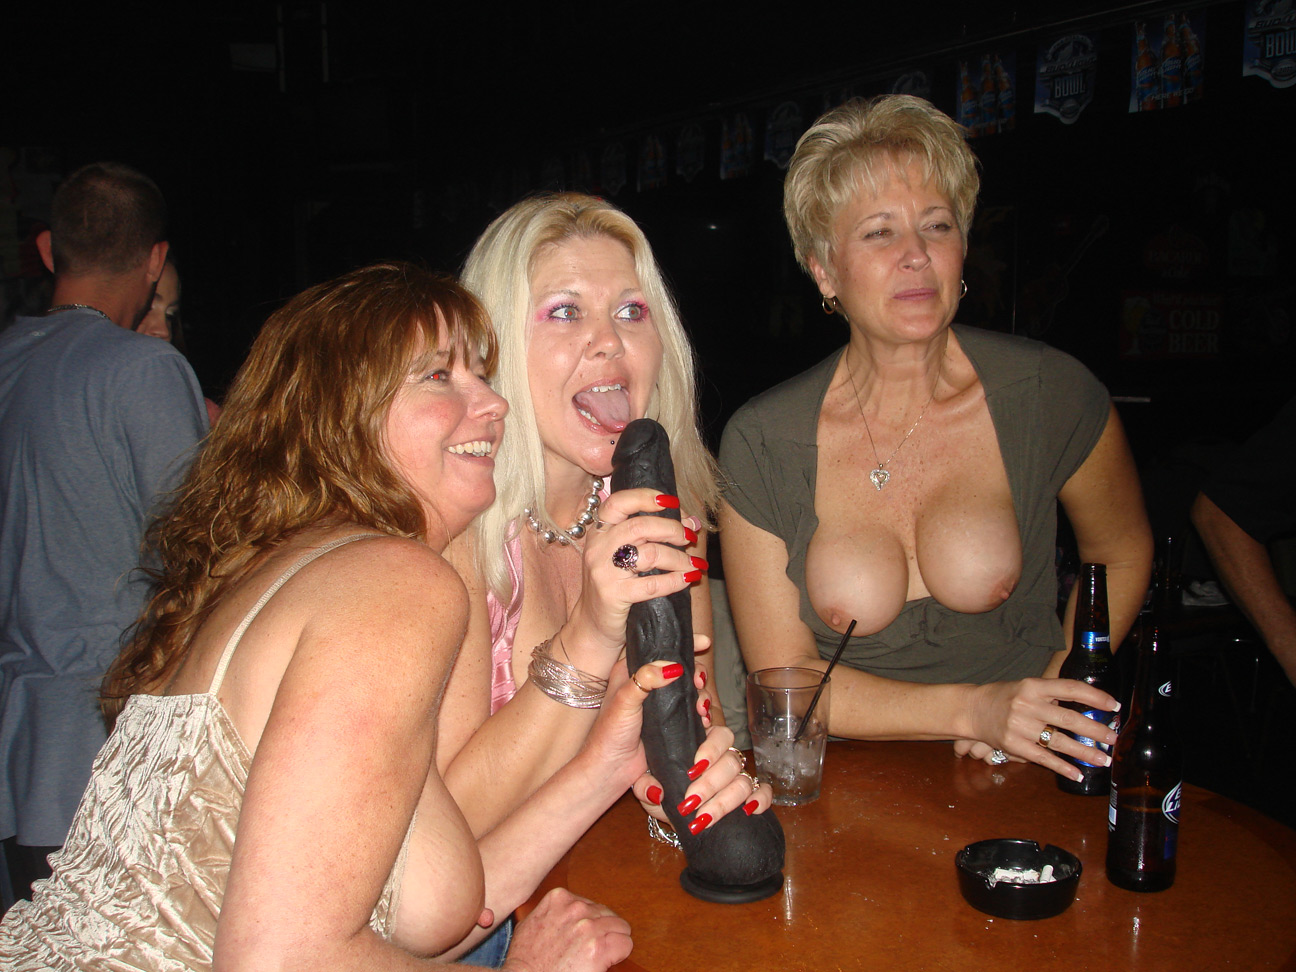 Tracy, Dee and the entire gang head out for a night of drinks and hijinx with some members of the site. pic